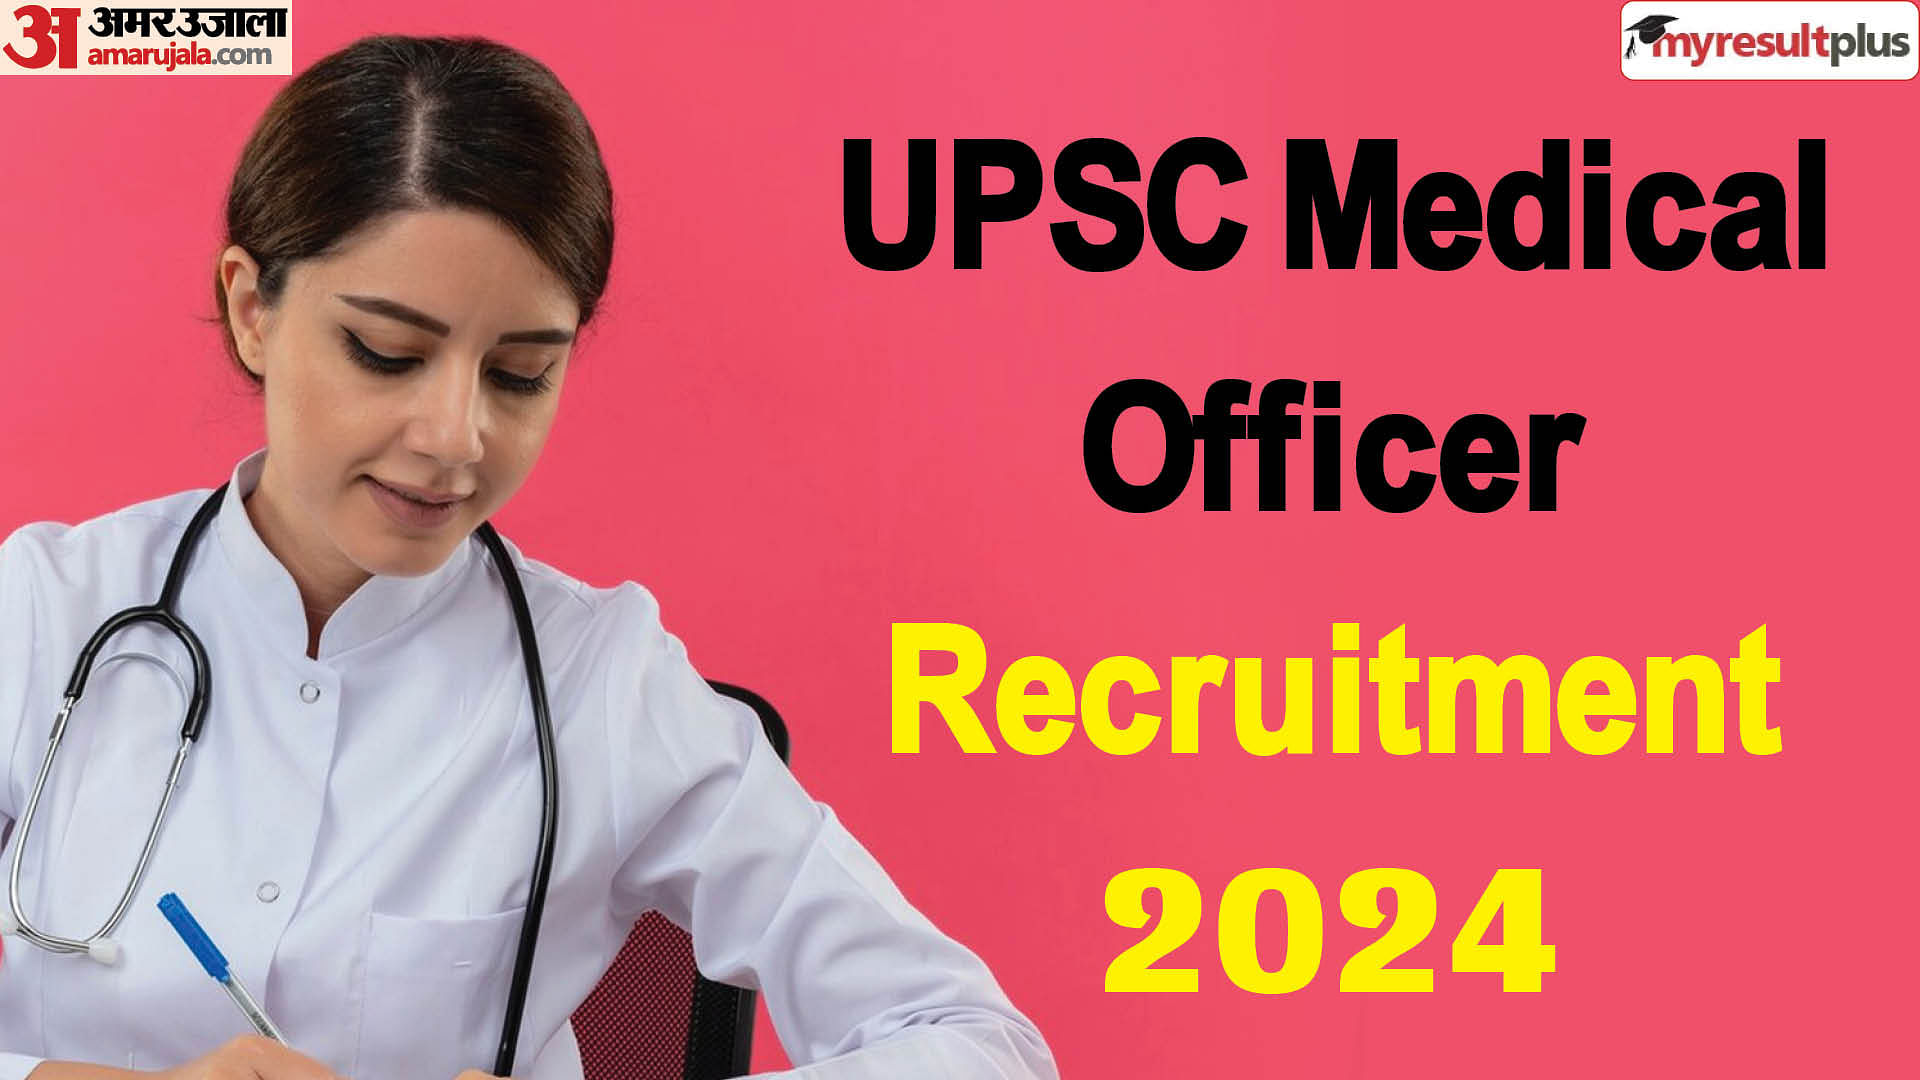 UPSC Recruitment 2024 registration window closing today, Check vacancy and how to apply here